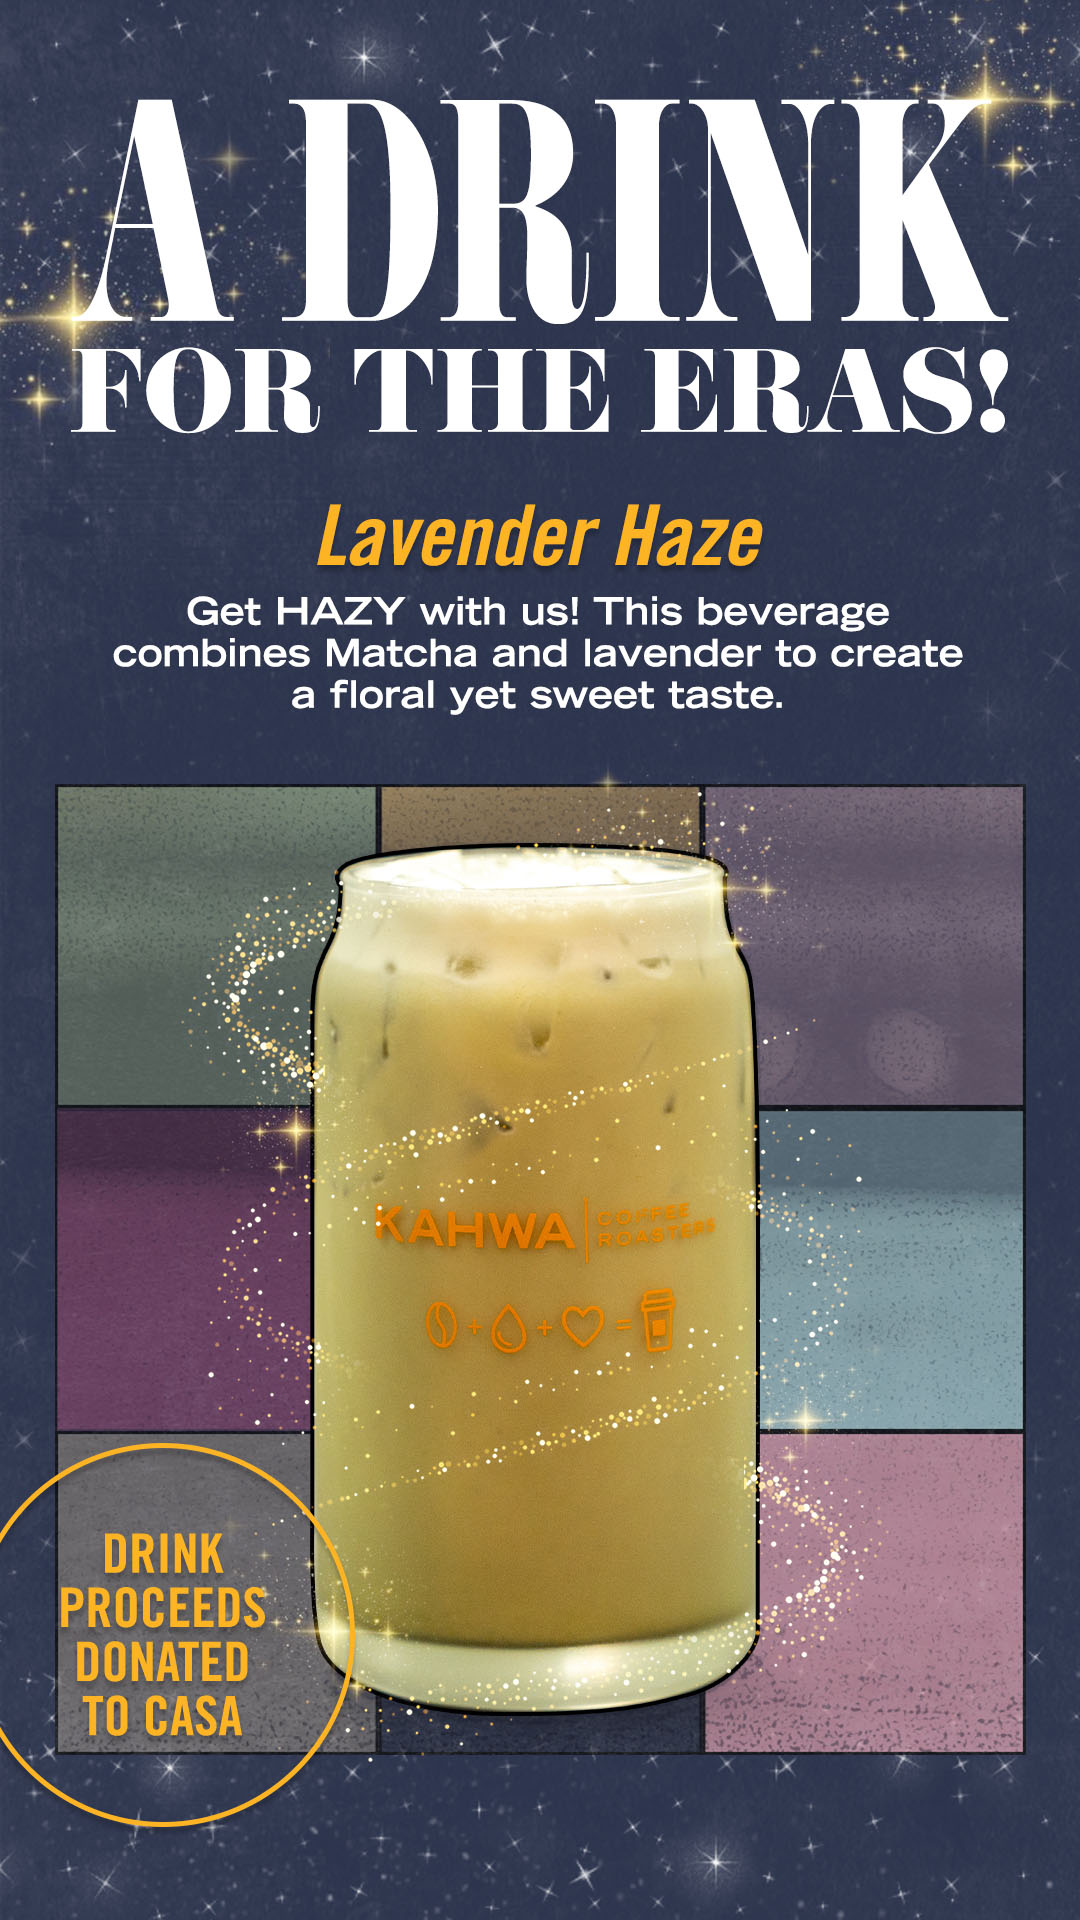 https://tbbwmag.com/2023/04/13/kahwa-coffee-releases-taylor-swift-inspired-beverages-to-celebrate-her-tampa-performances/kahwa_taylor_swift_story_lavenderhaze_v2_final_updated/